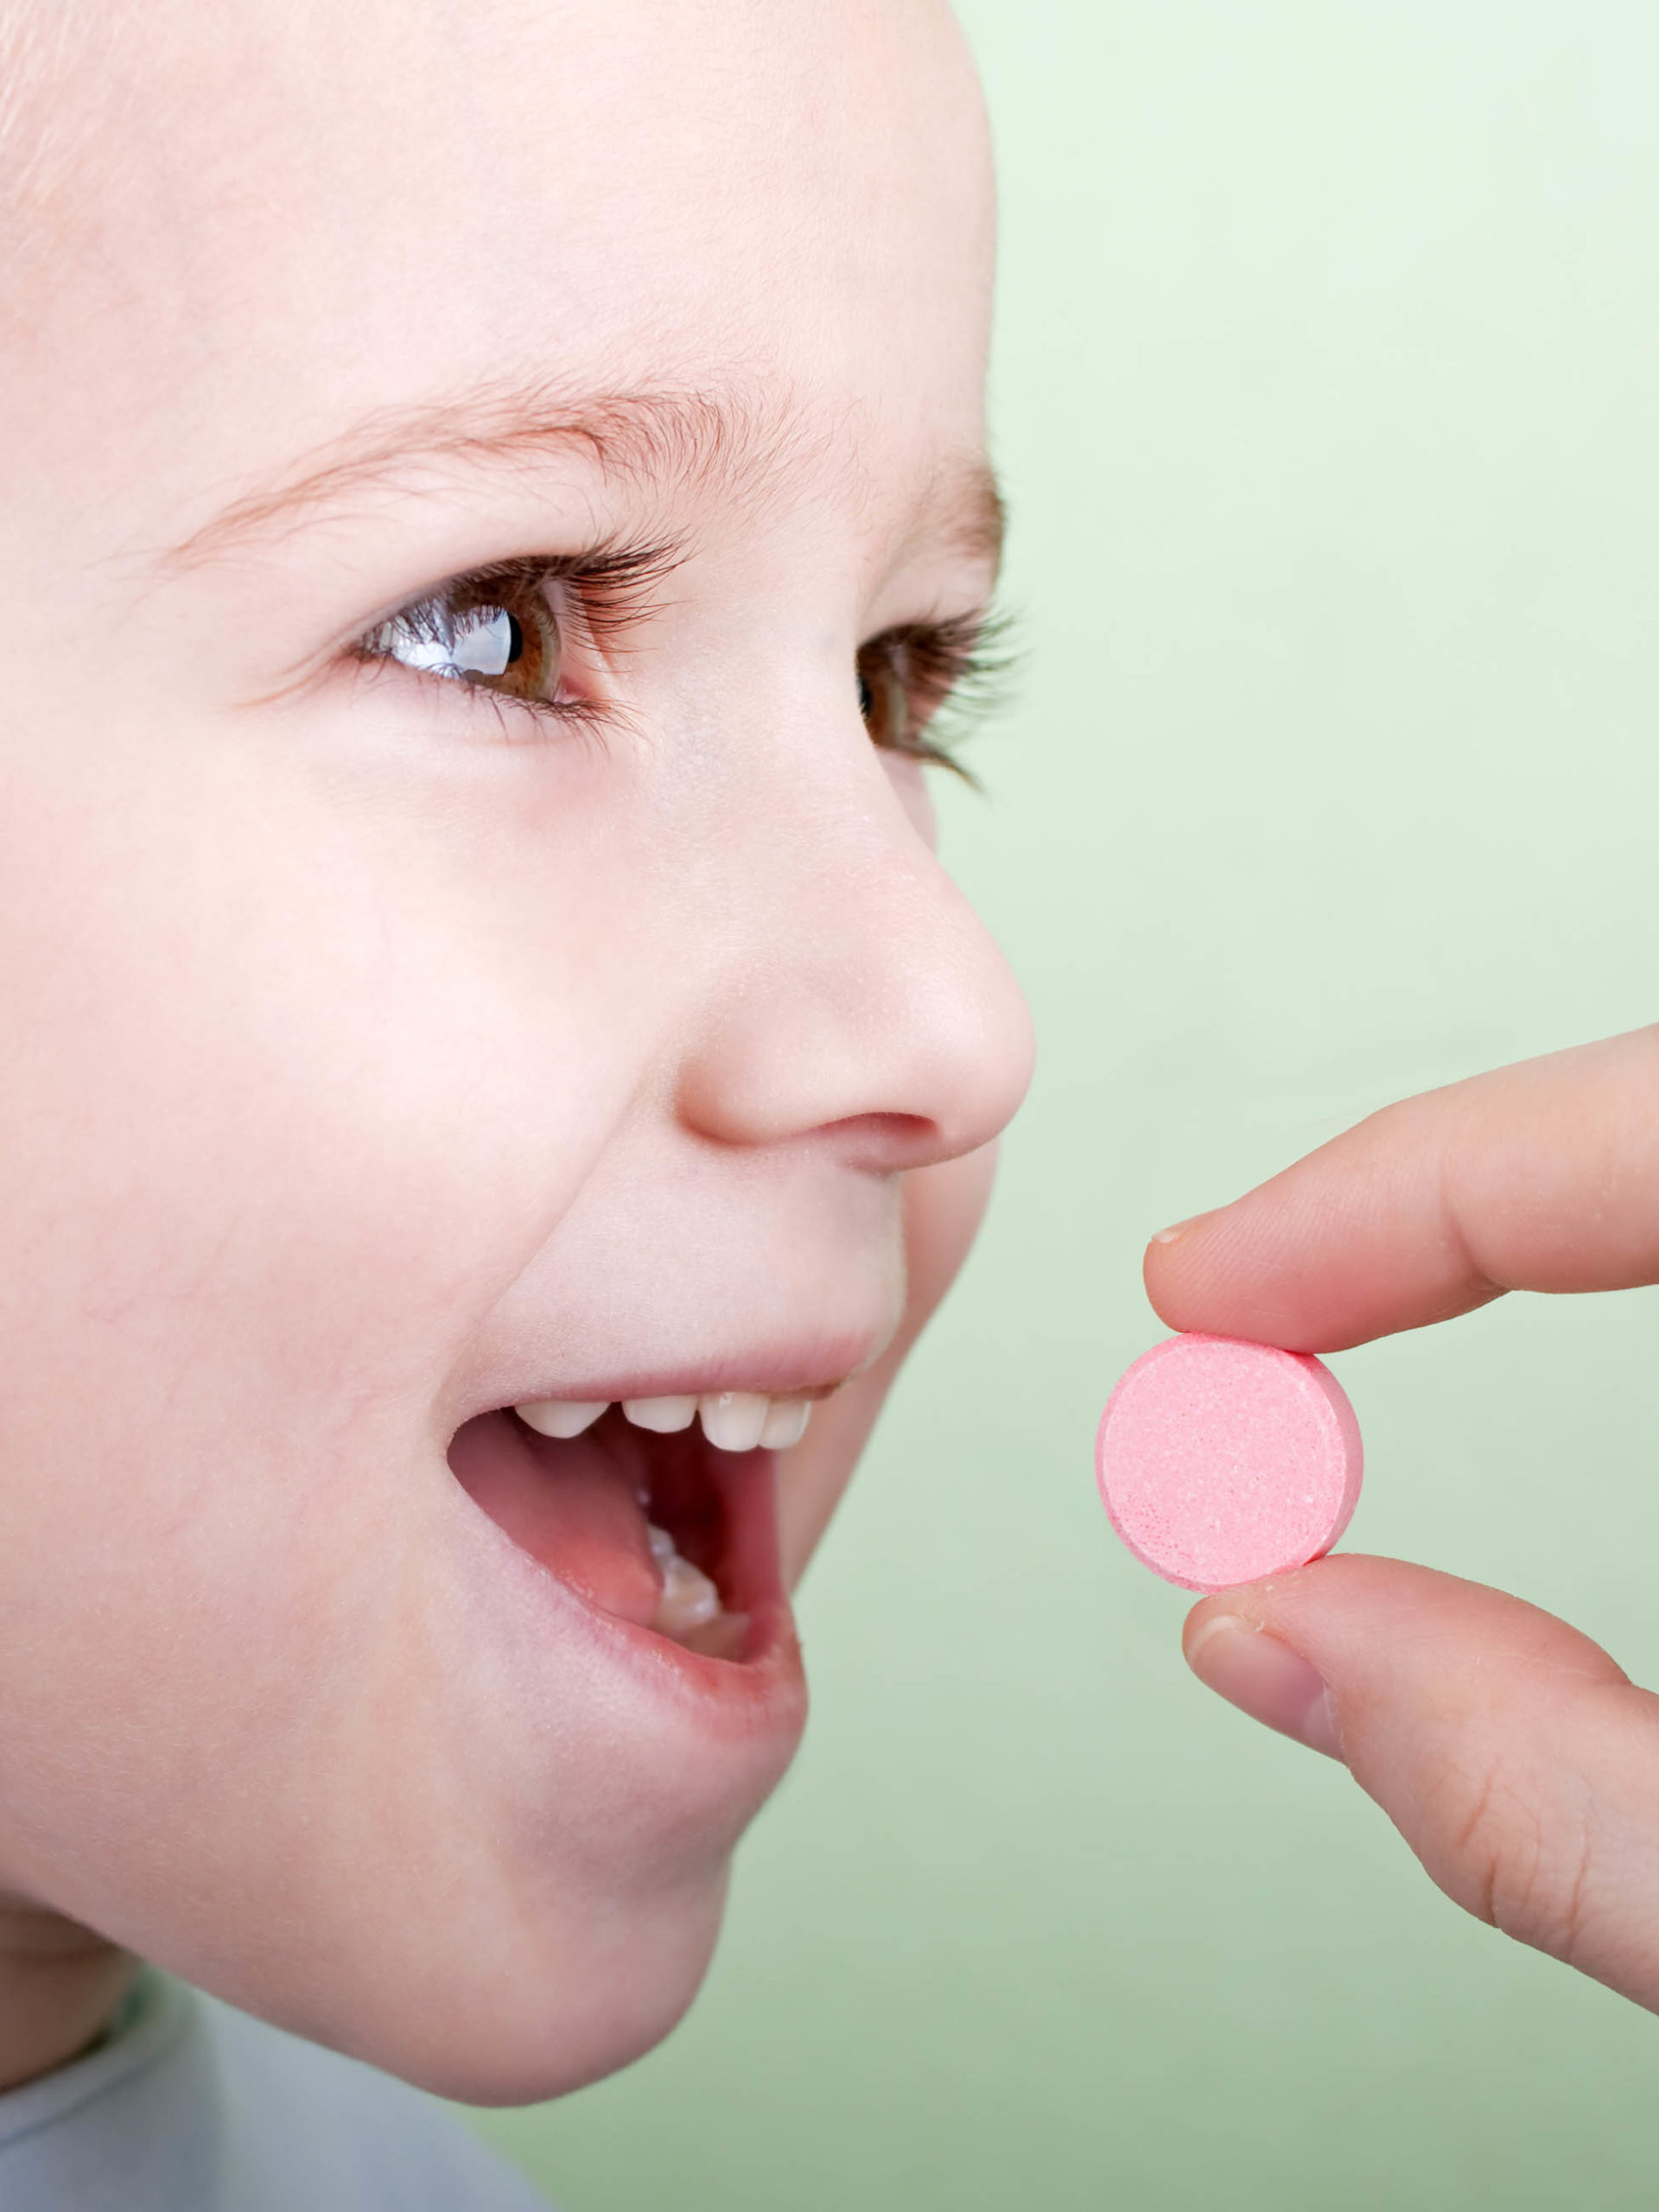 Human hand giving child chewable tablet medication